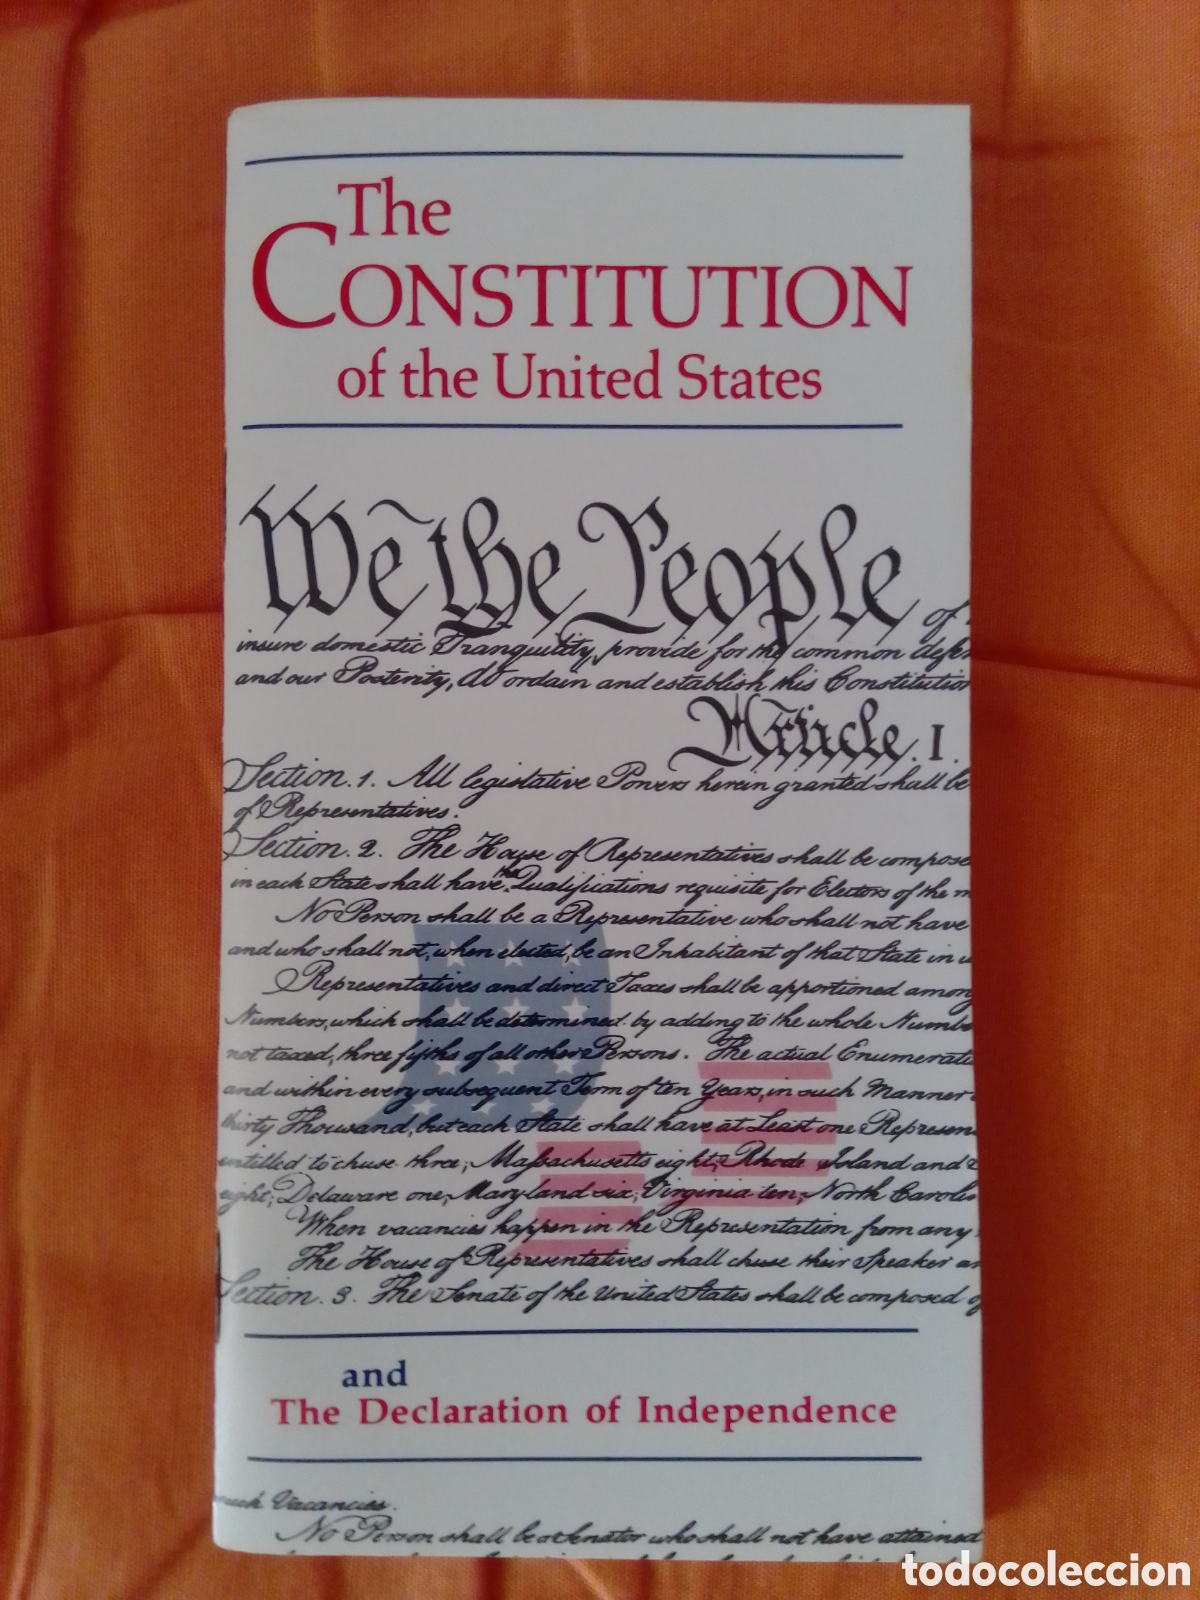 Constitution of the United States.